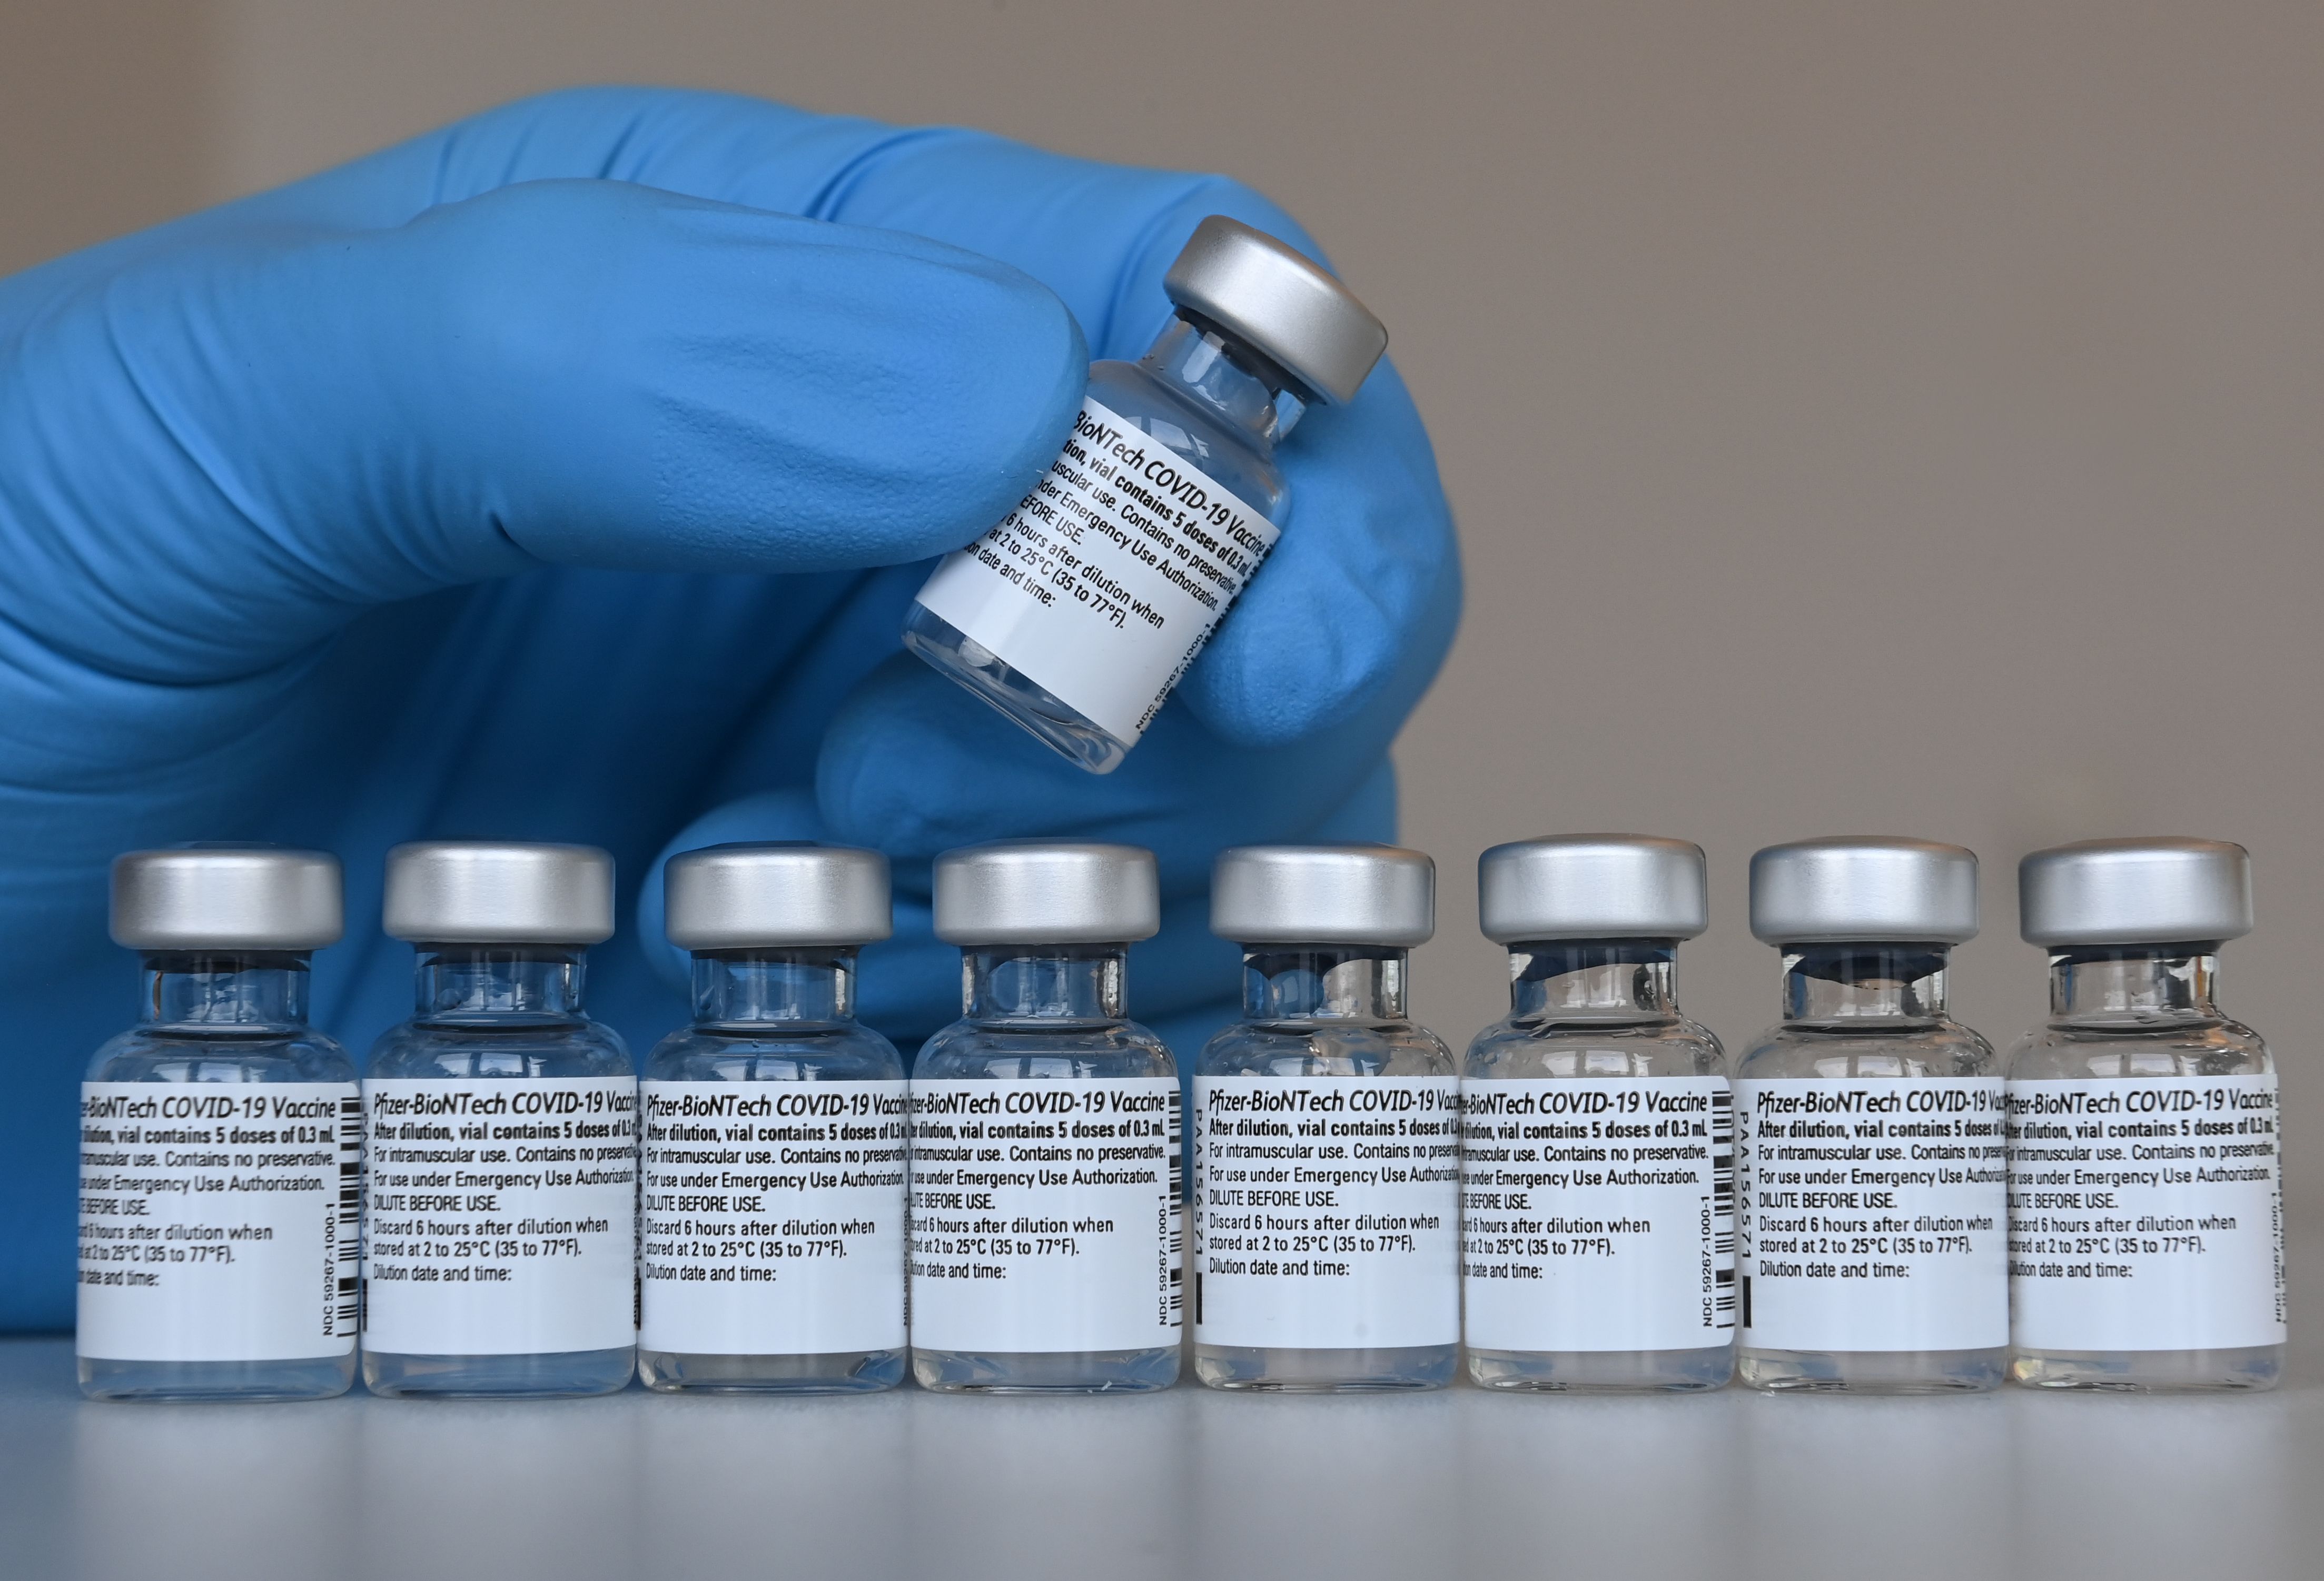 Pfizer vaccine performs as well in real world as in trials, study concludes